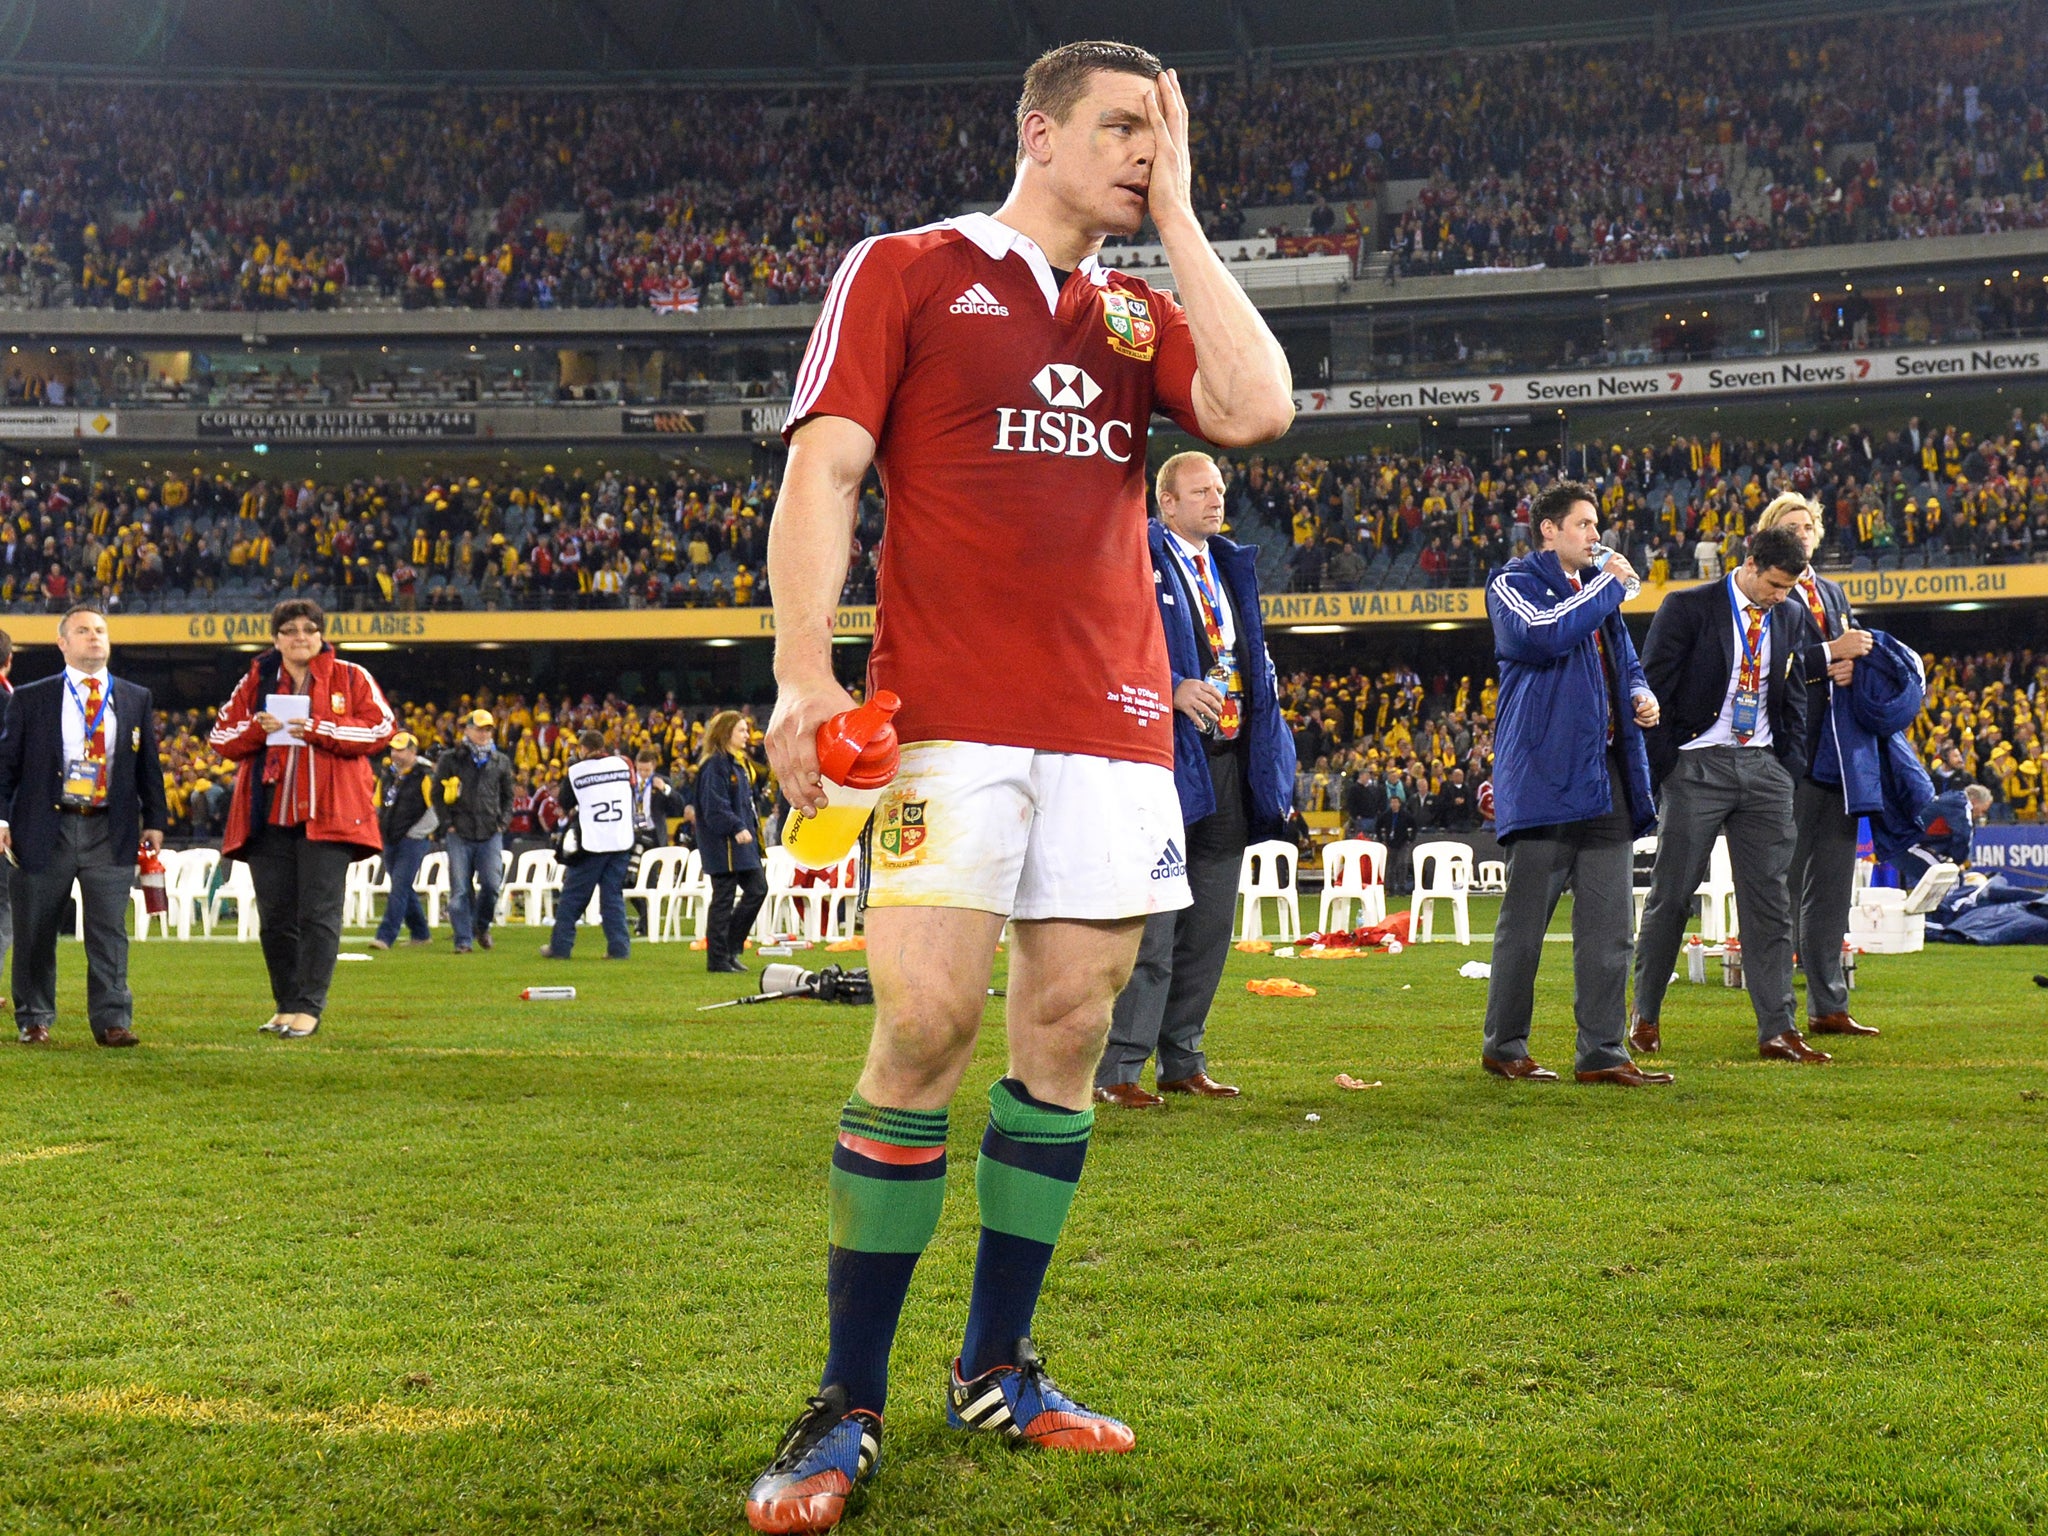 Brian O'Driscoll expresses his disappointment following the 16-15 defeat to Australia